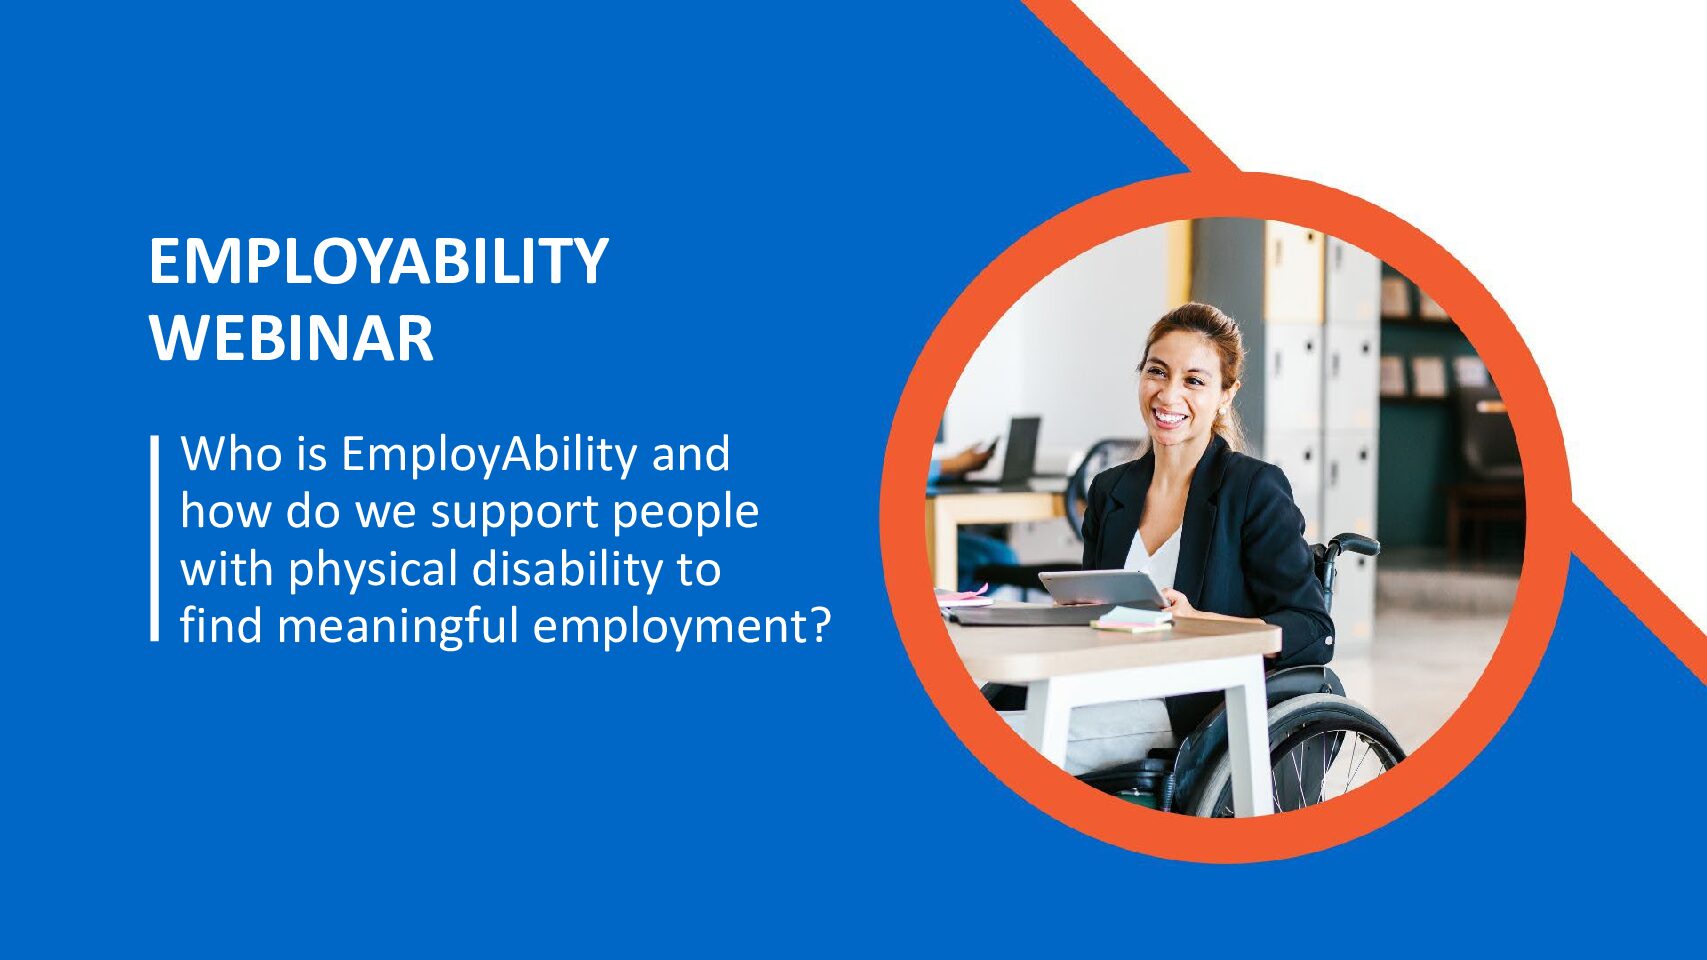 EmployAbility – What is it?